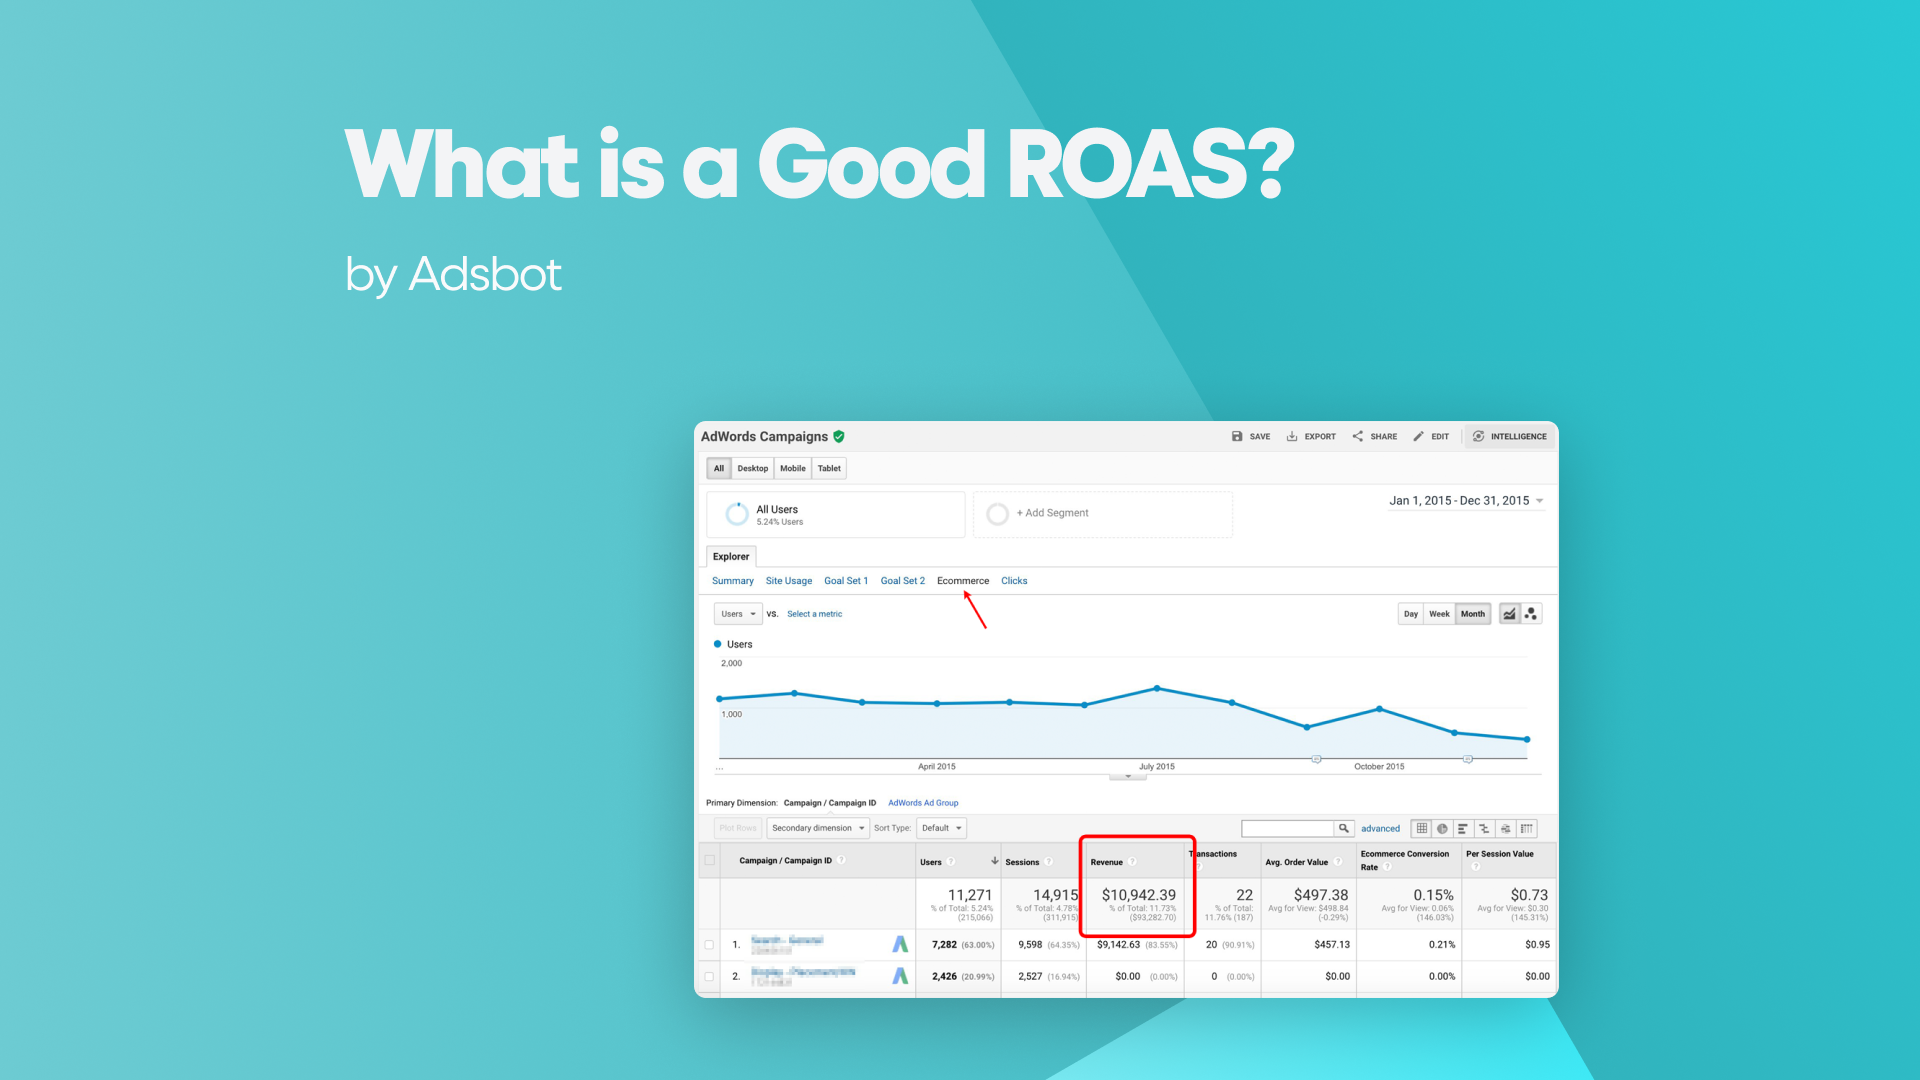 What Is a Good Roas?